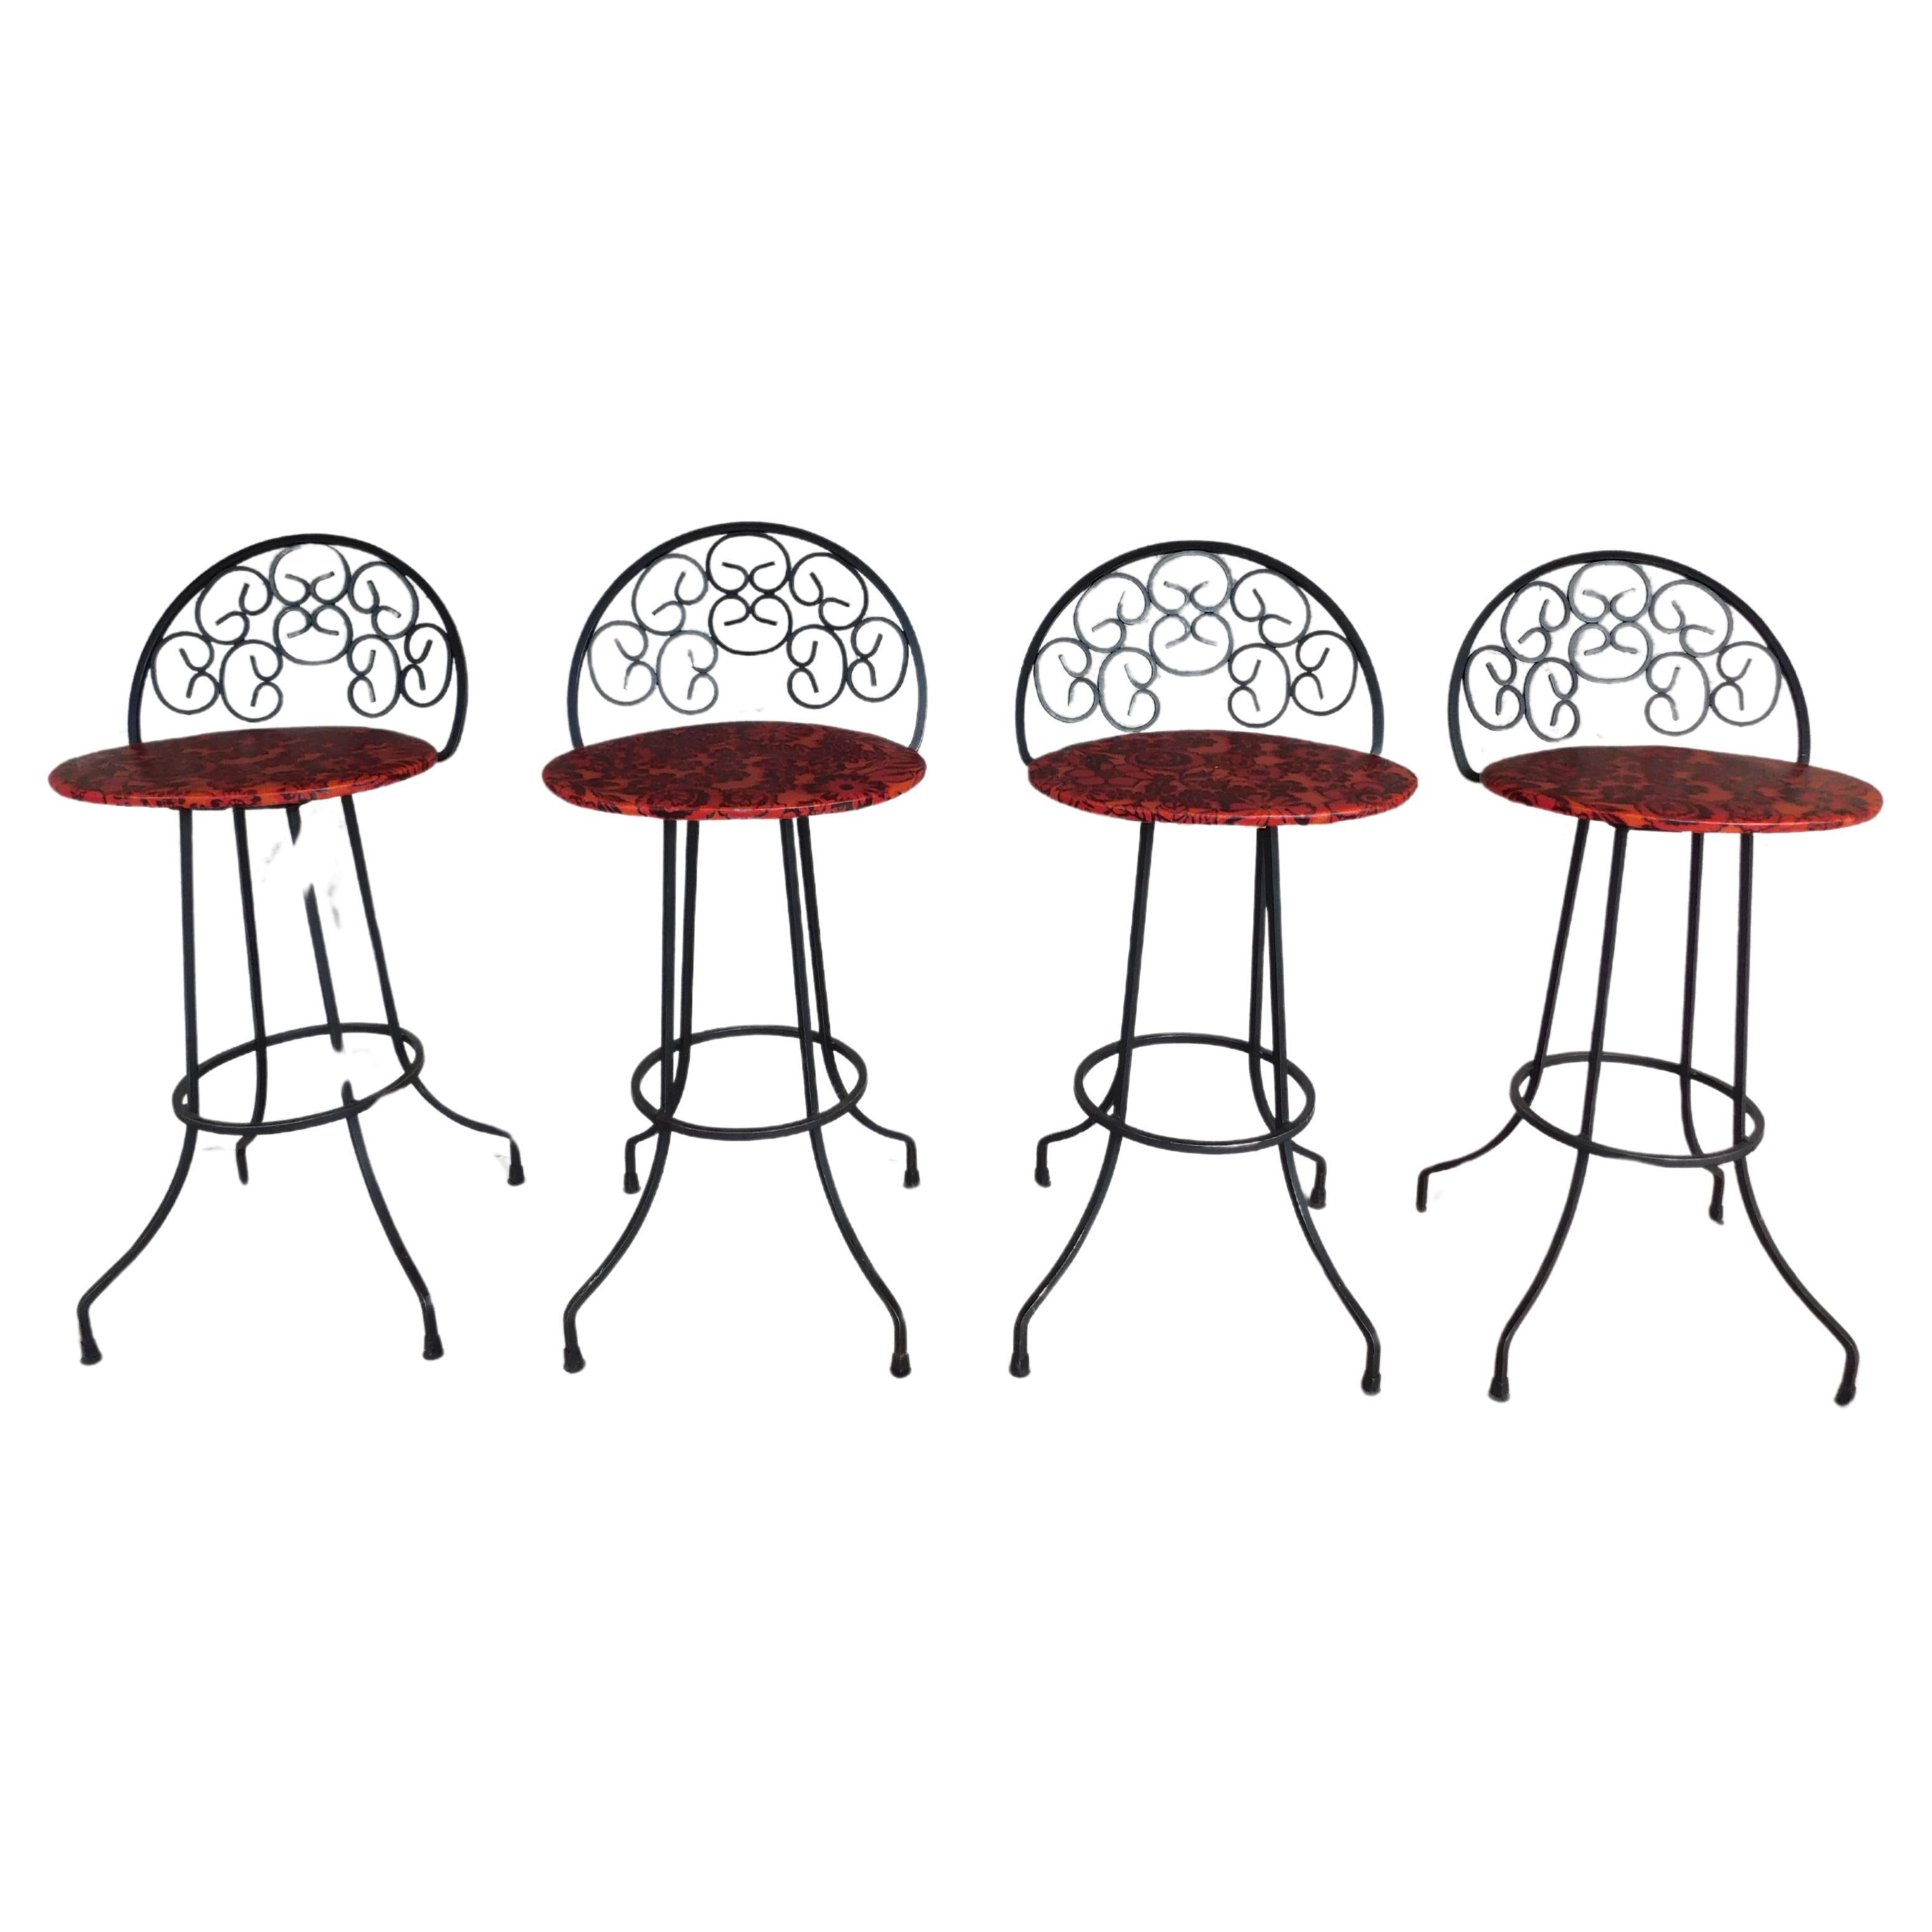 Vintage Mid-Century Wrought Iron Bar Stools Attributed to Authur Umanuff - Set 4 For Sale